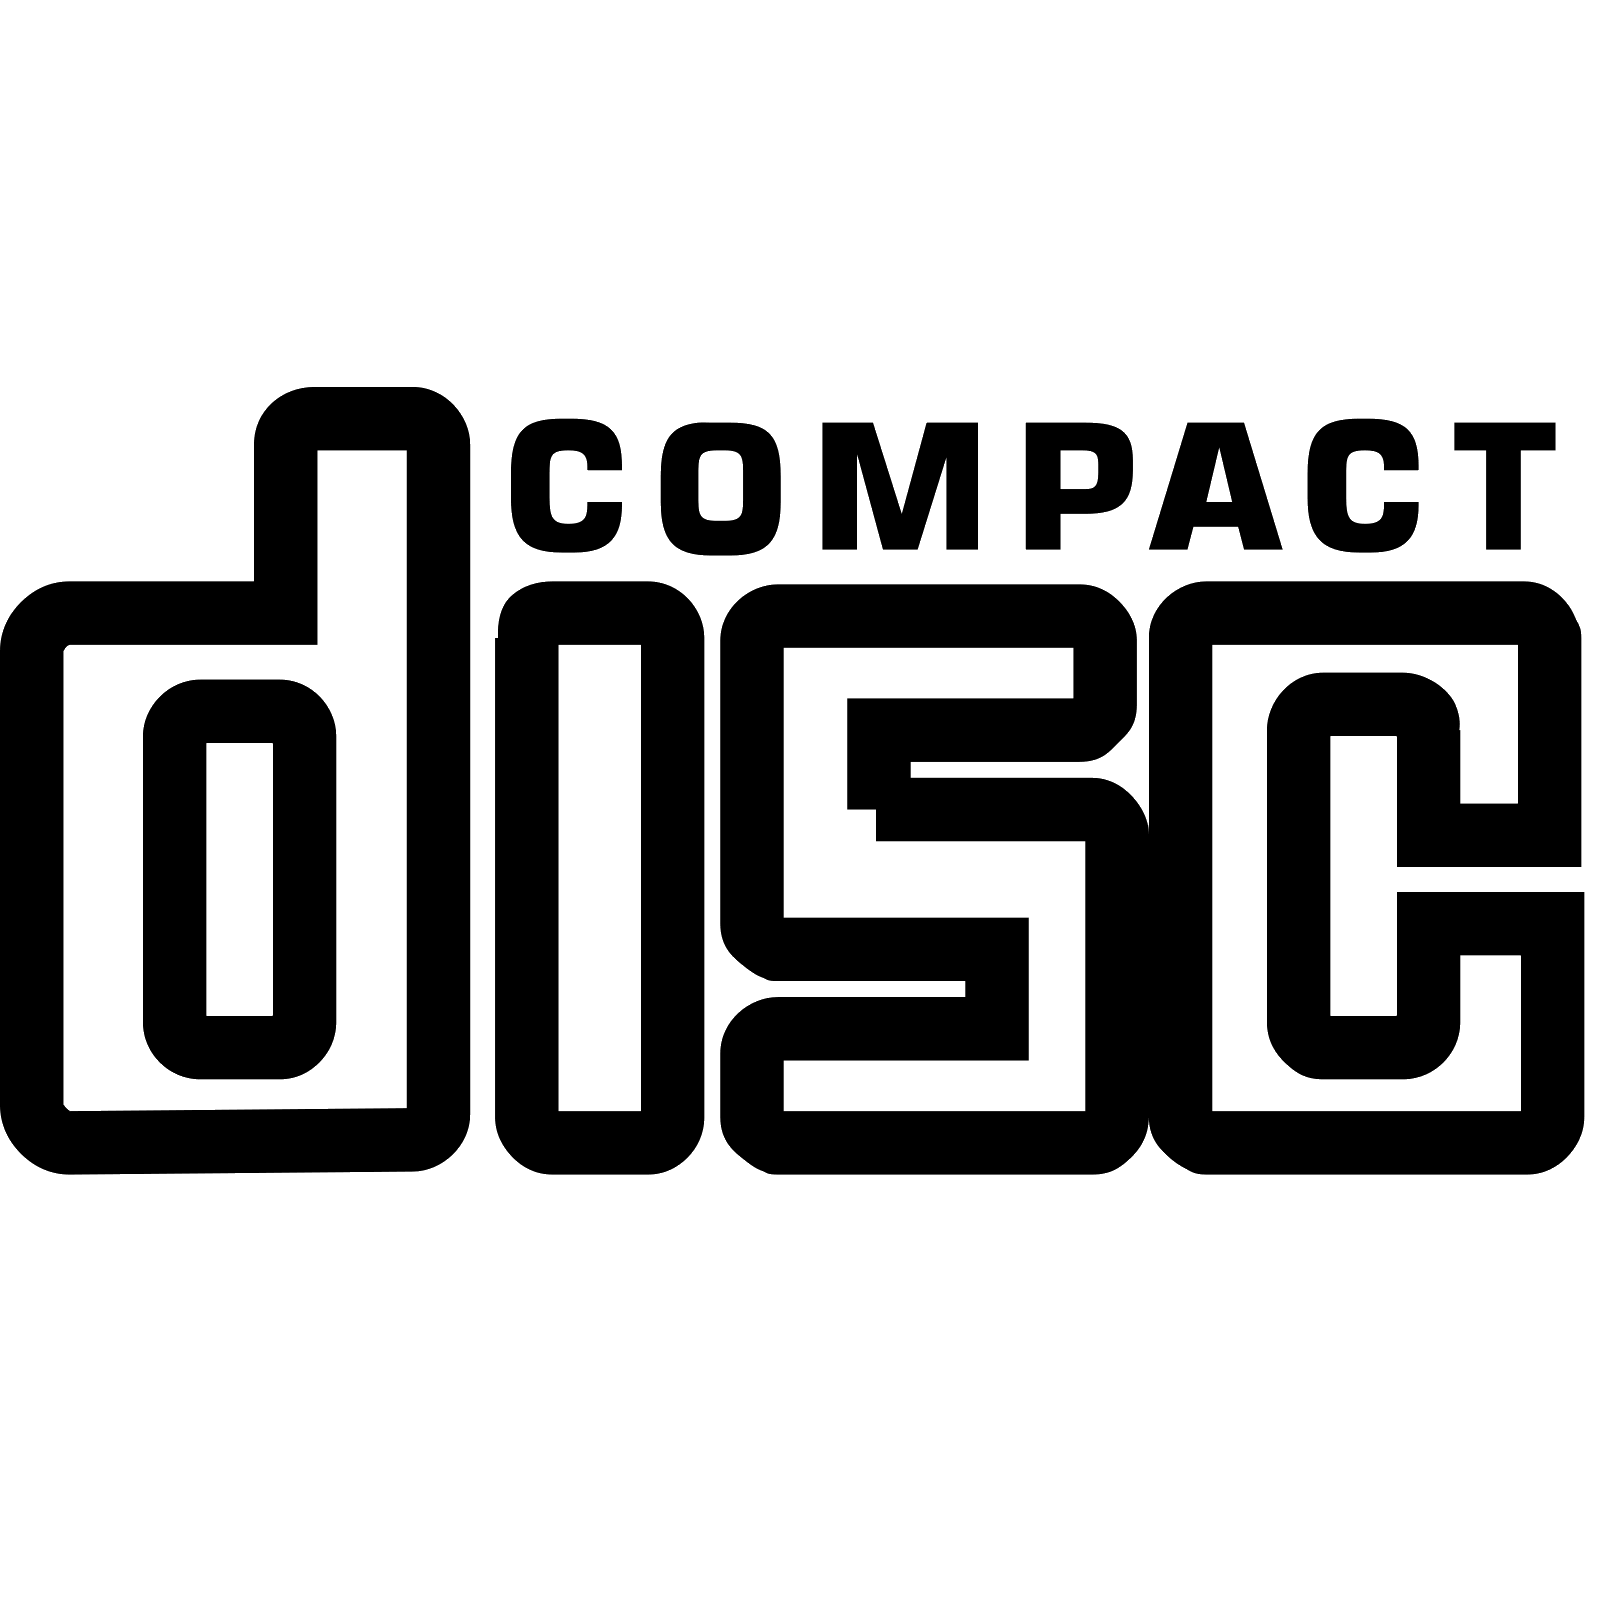 Compact Disc Logo - Compact disc logo png 5 » PNG Image